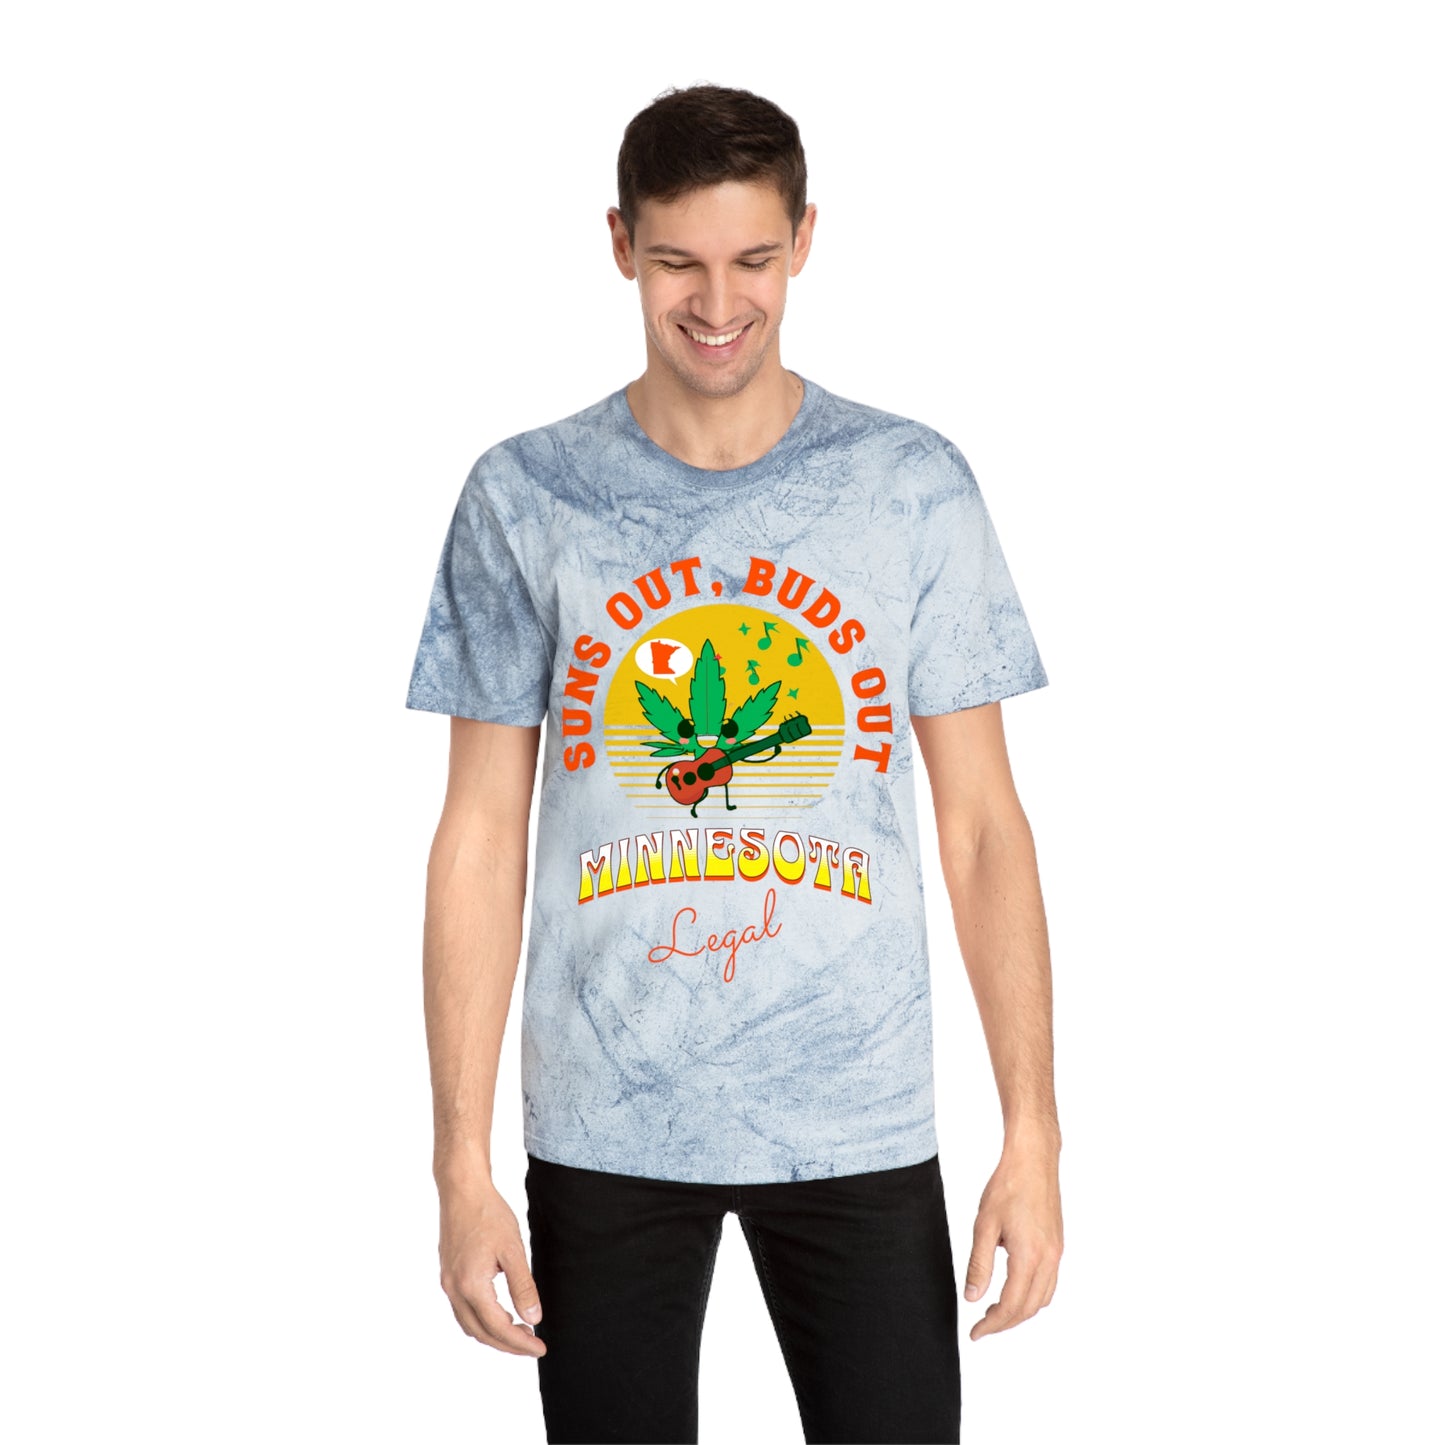 Suns Out, Buds Out | Minnesota Legal Comfort Color T-Shirt